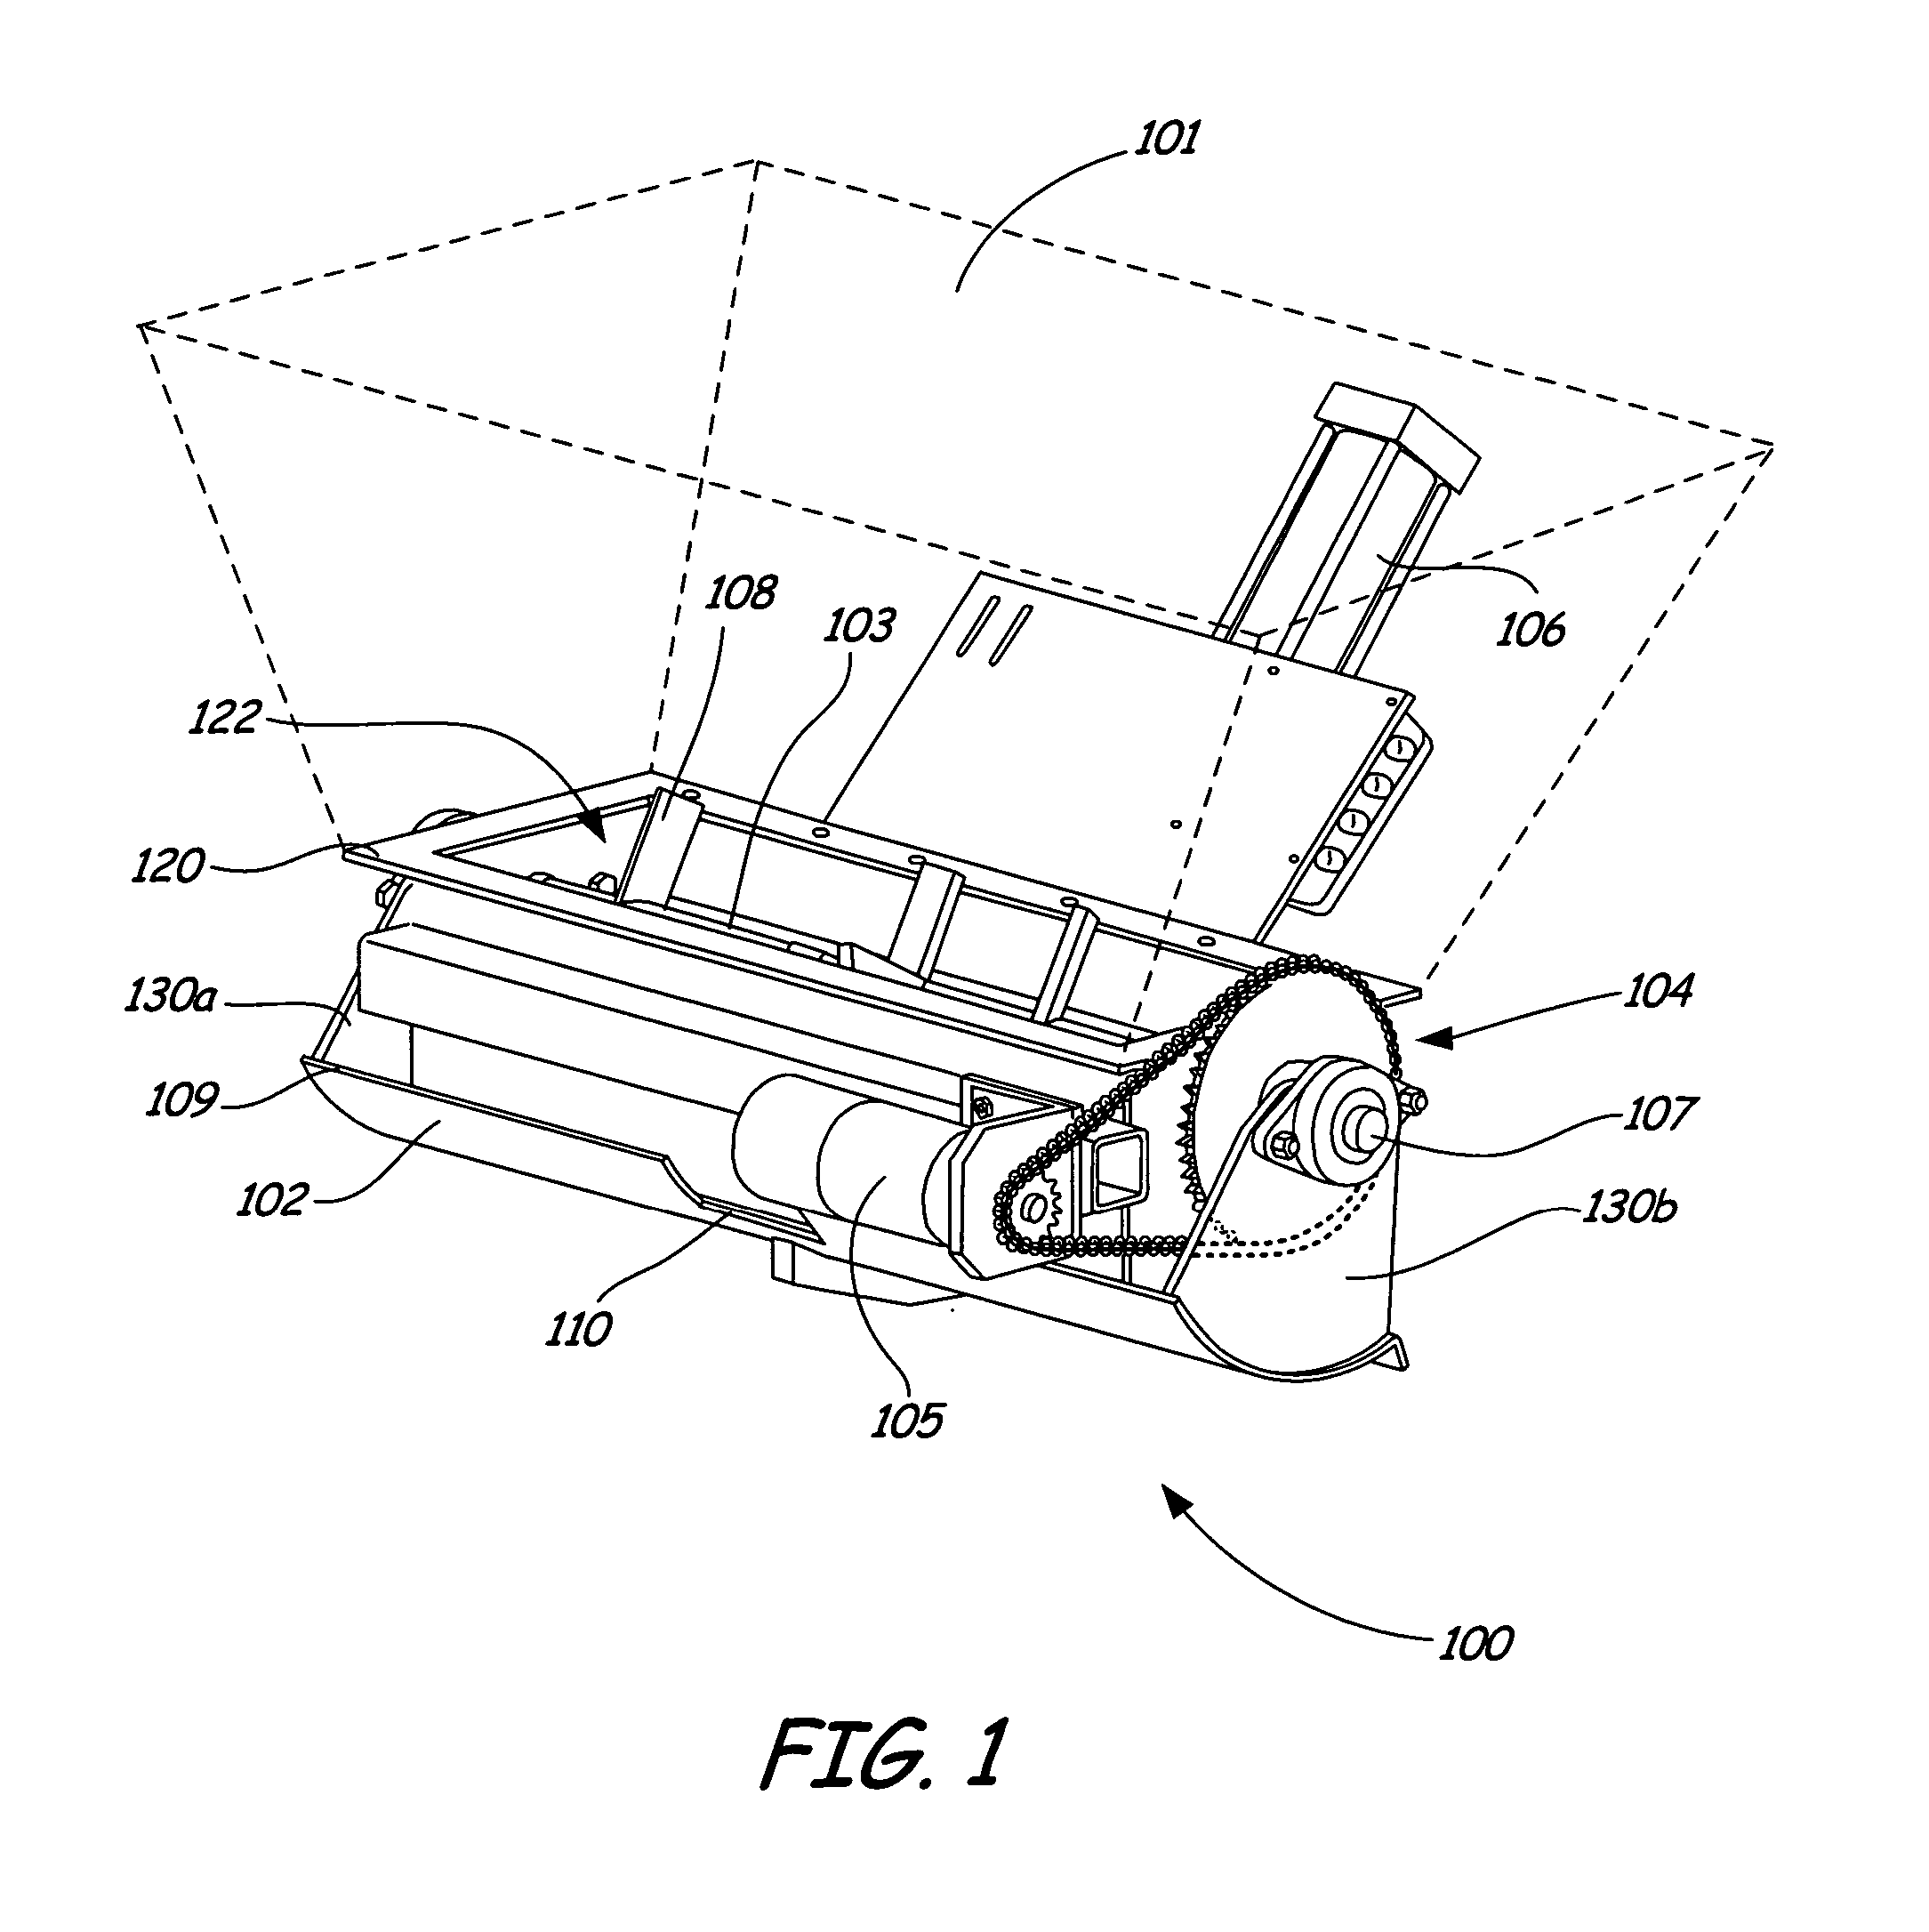 Bin gate for providing variable output flow rates